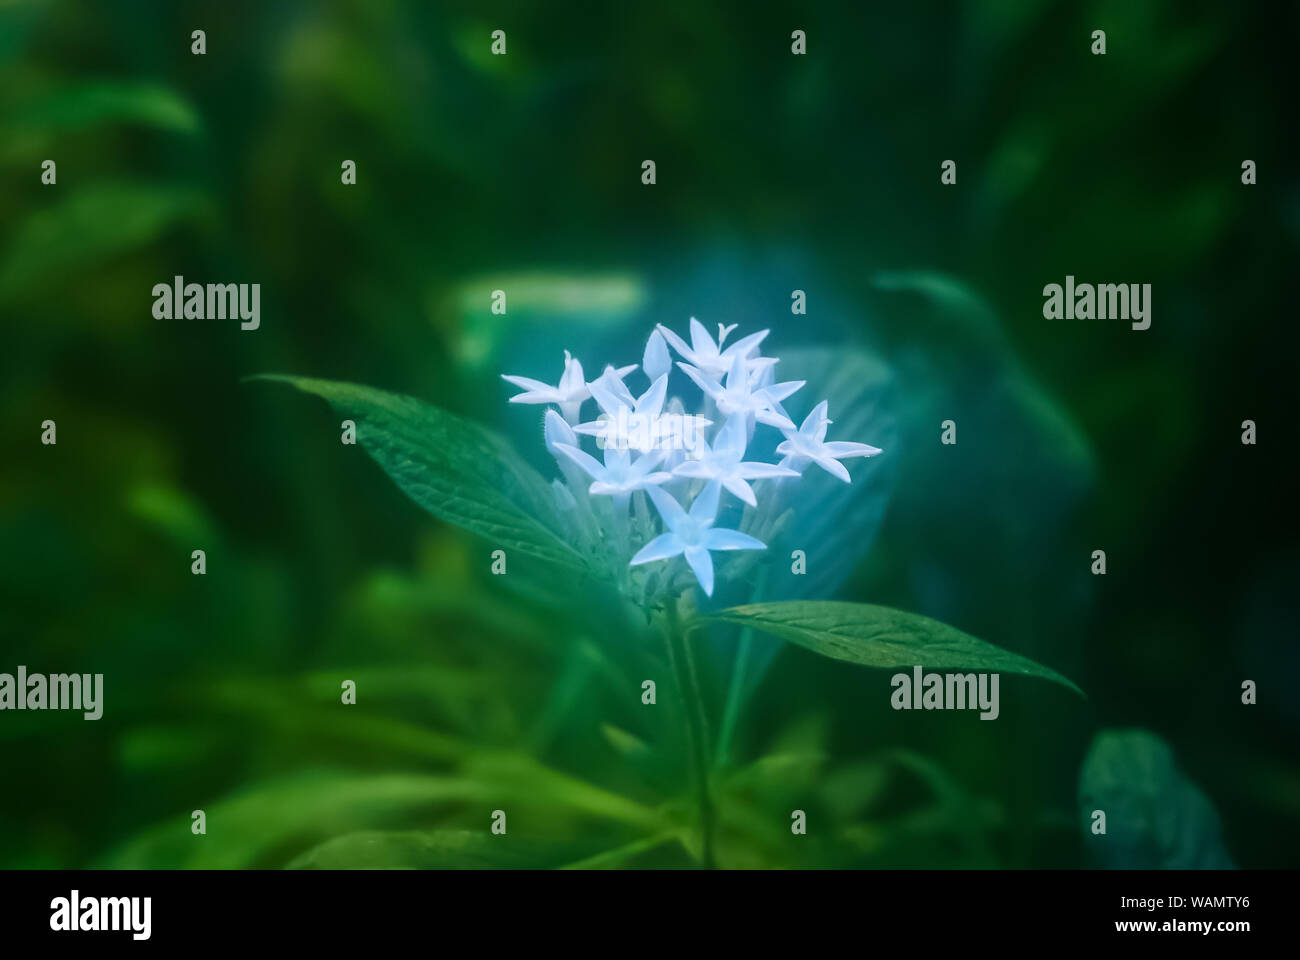 green blurred misty floral background with white glowing flowers in the foreground Stock Photo